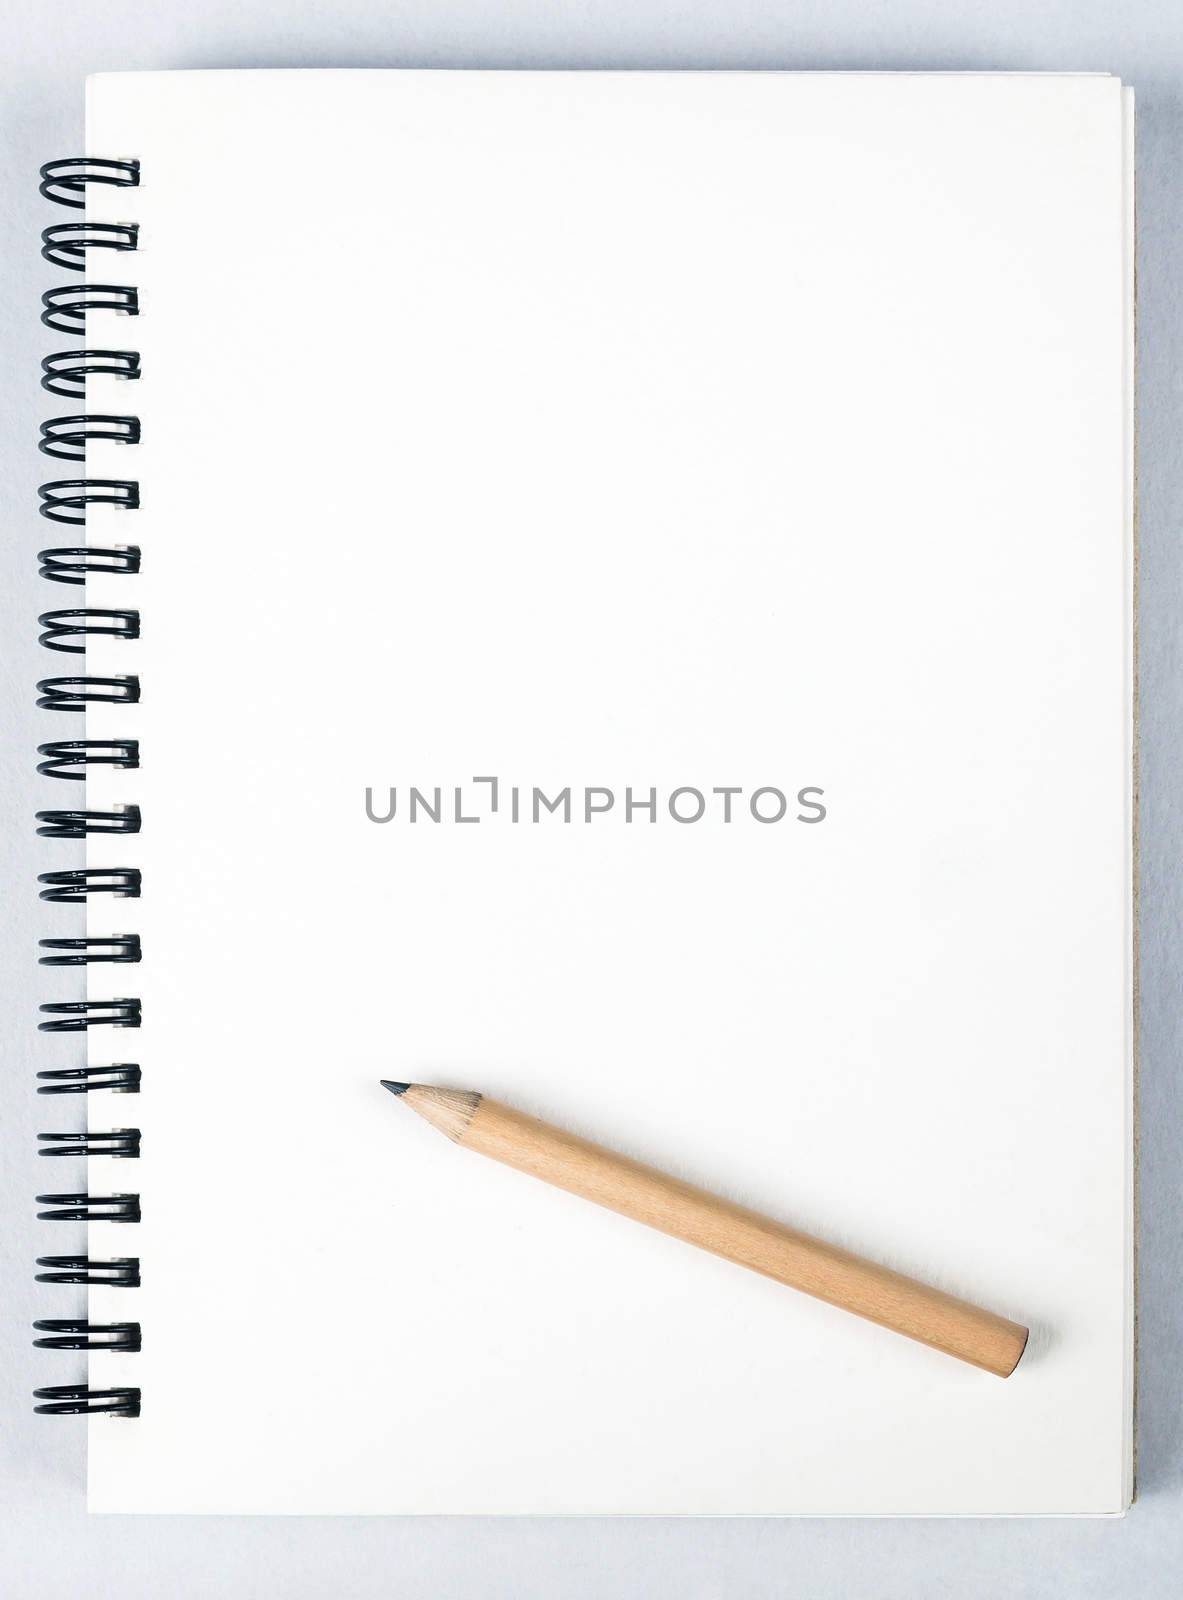 sketch book with pencil on white background